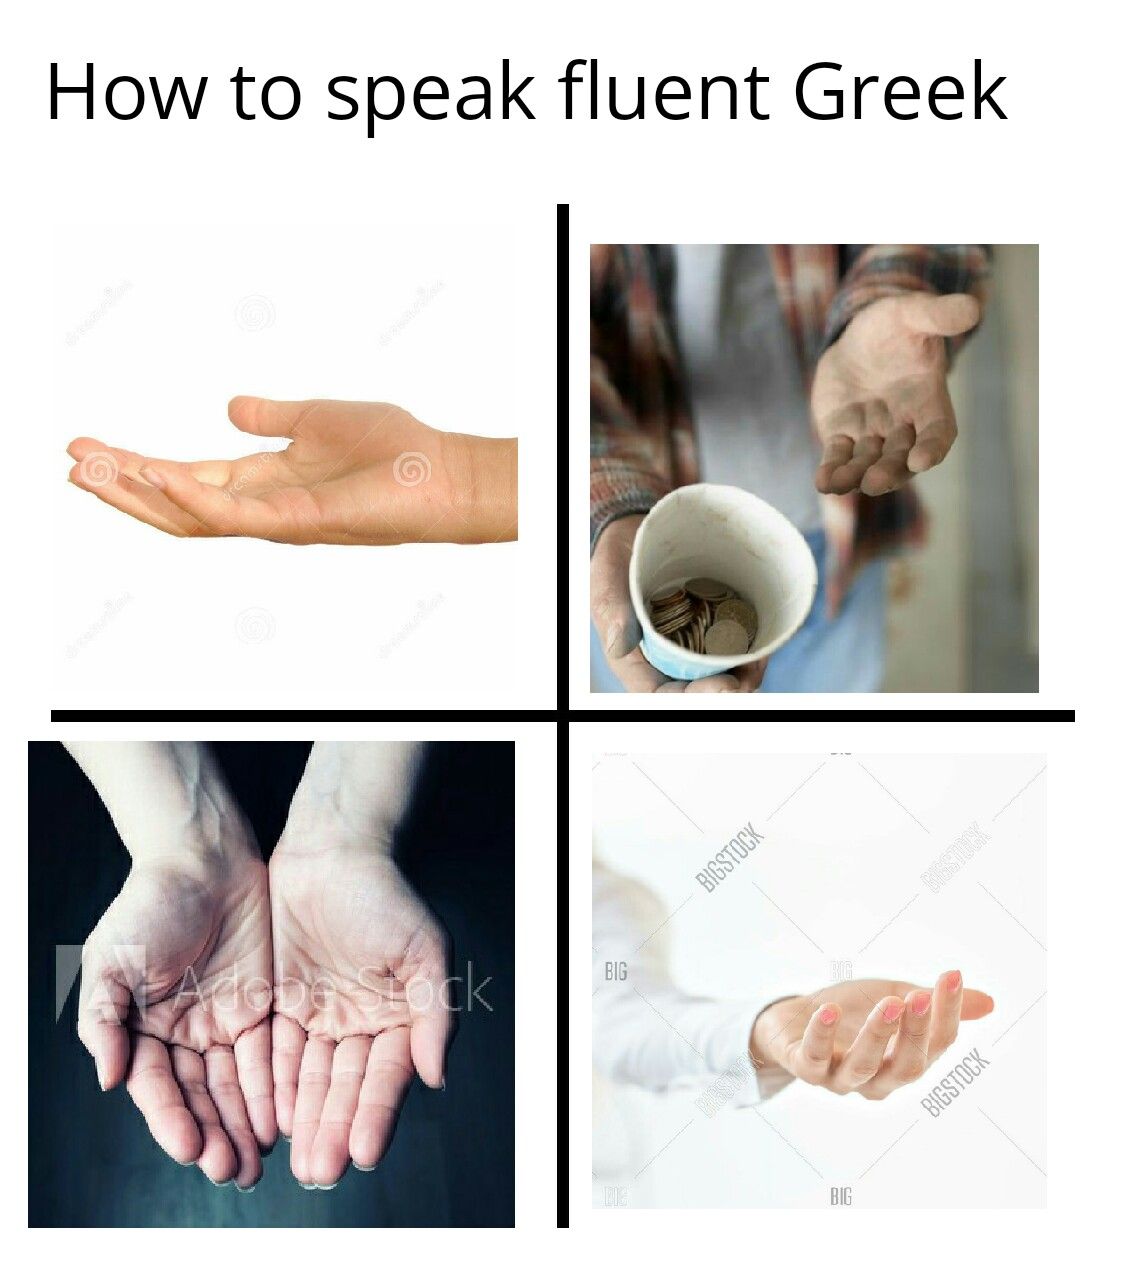 In response to the now outdated "how to speak Italian" memes